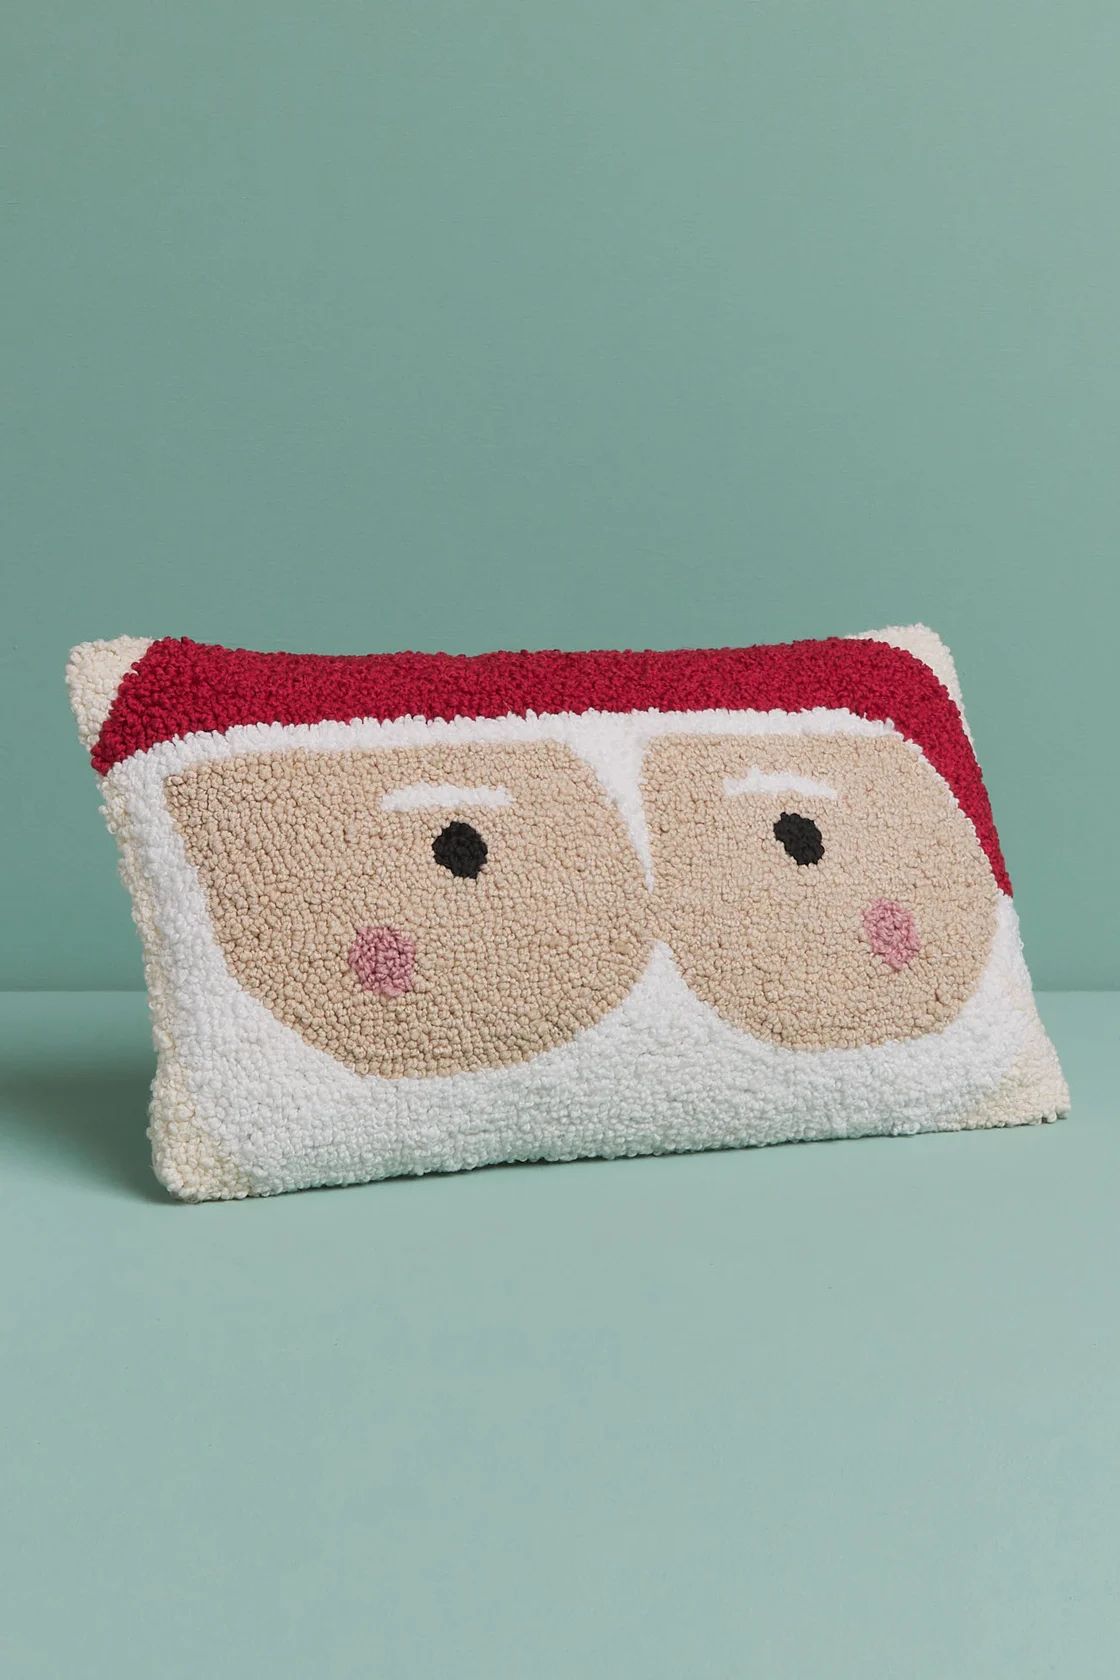 Santa Claus Pillow in Red | Altar'd State | Altar'd State